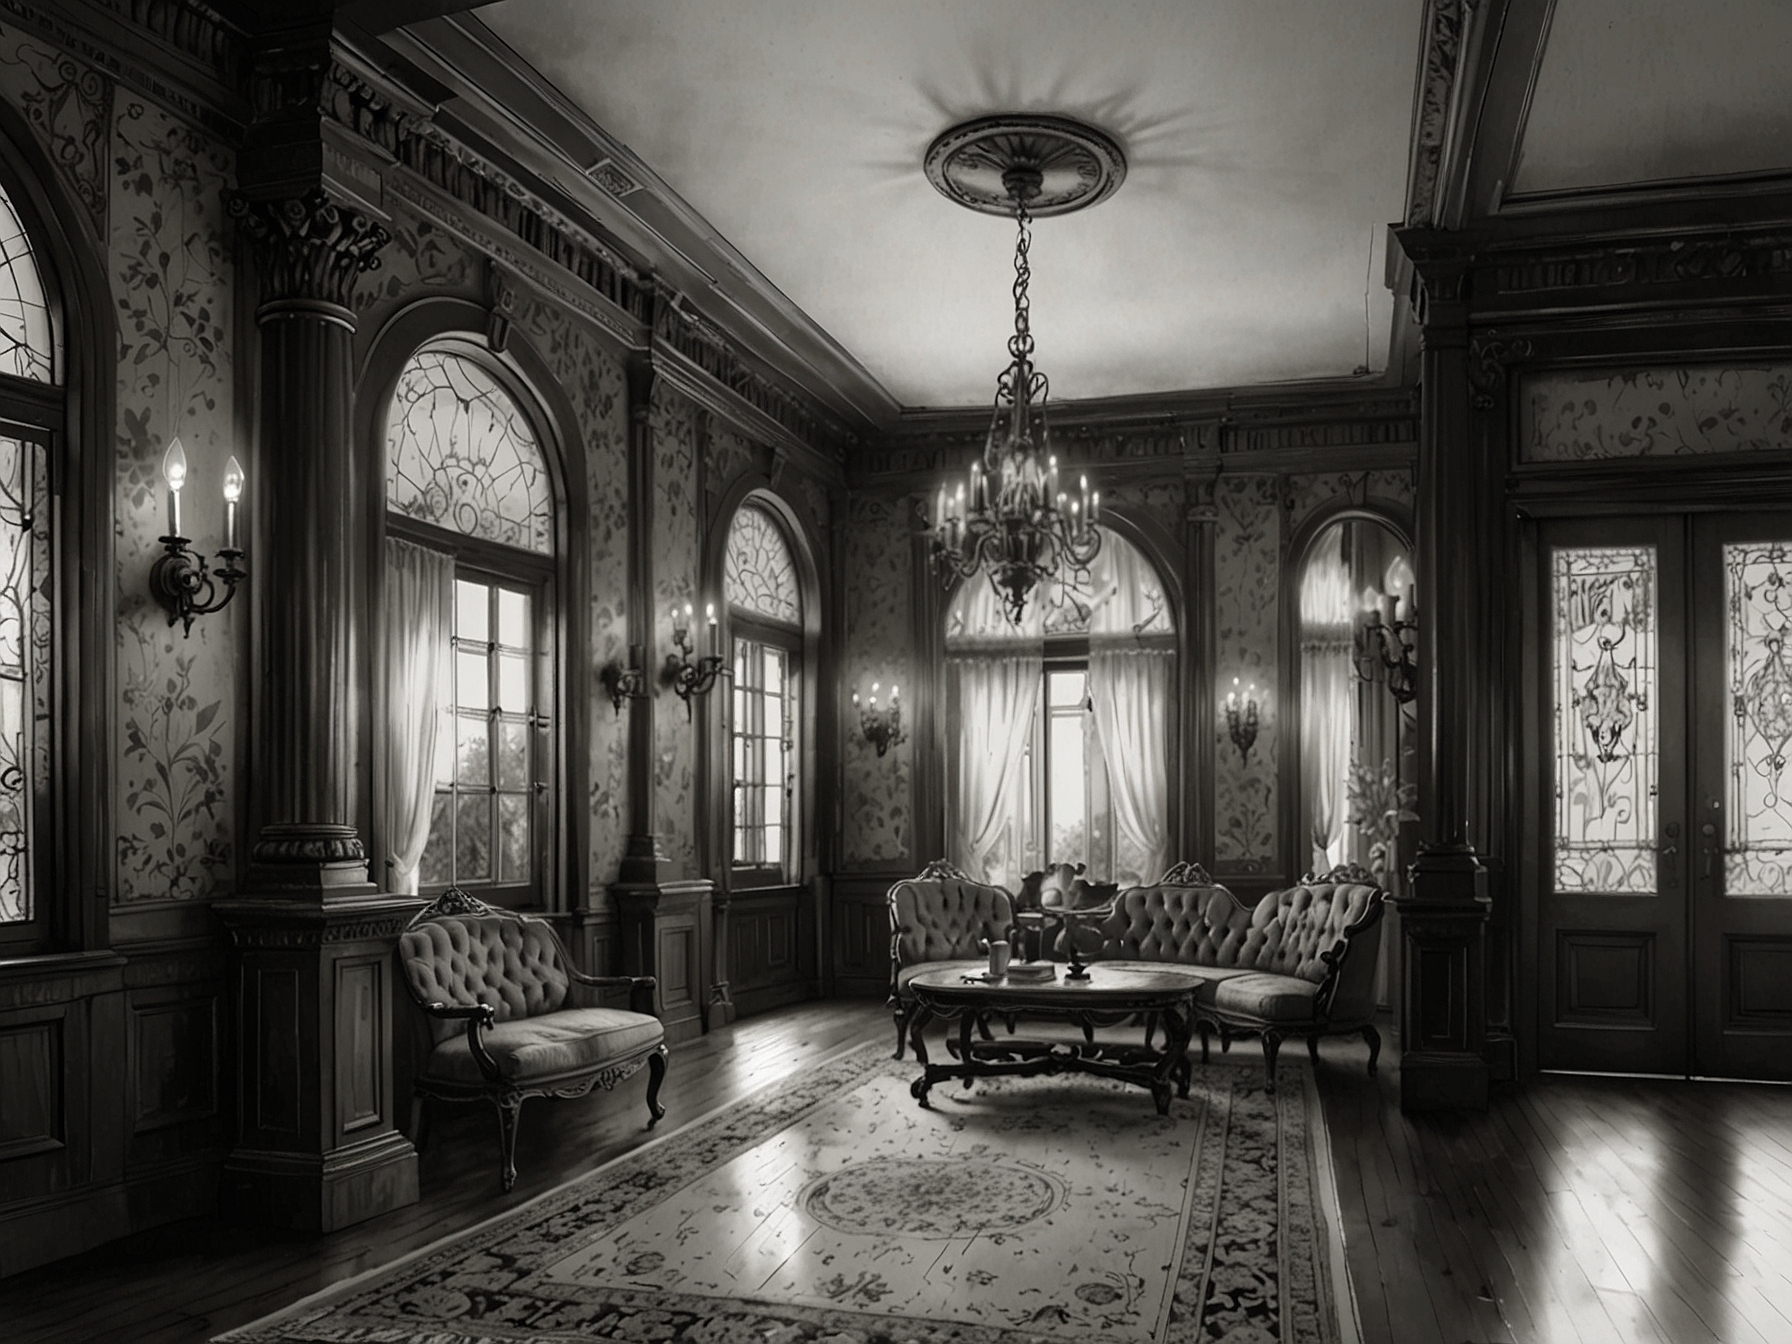 A glimpse into the mansion's interior, capturing the elaborate woodwork and original fixtures that define its late 19th-century Victorian charm.